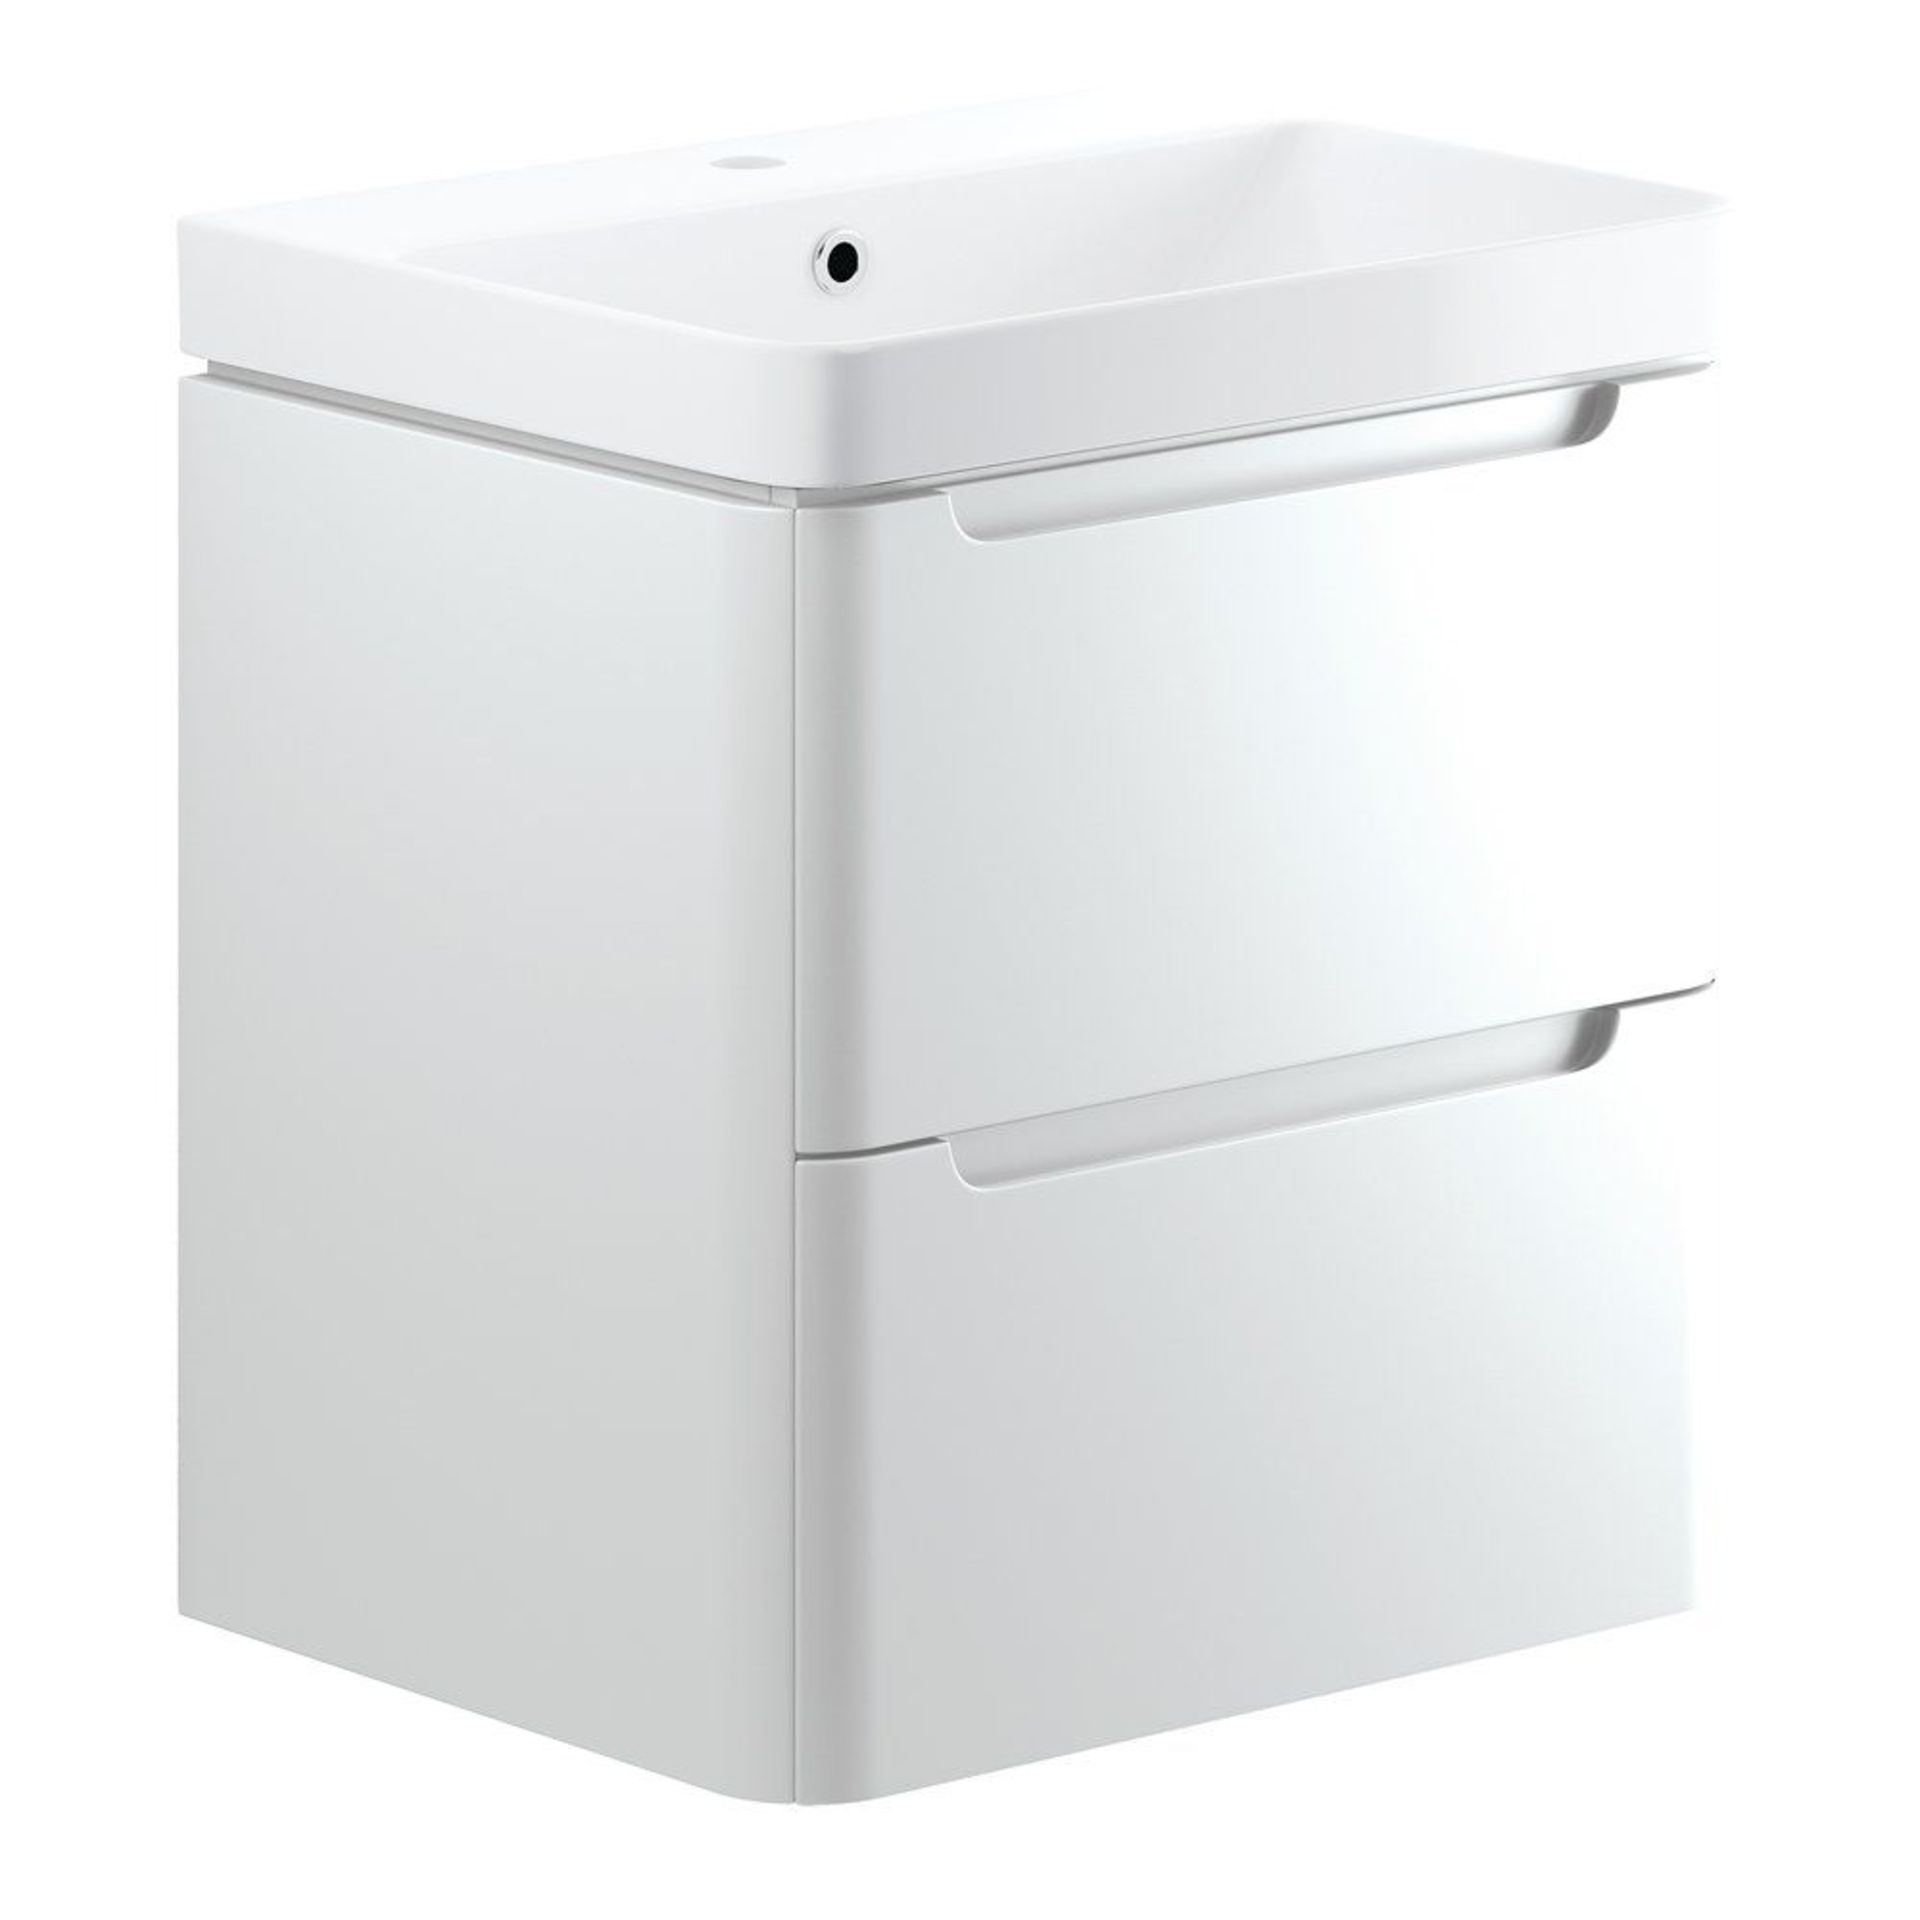 NEW (M156) Lambra 600mm 2 Drawer Wall Hung Vanity Unit - White. RRP £499.99.COMES COMPLETE W...